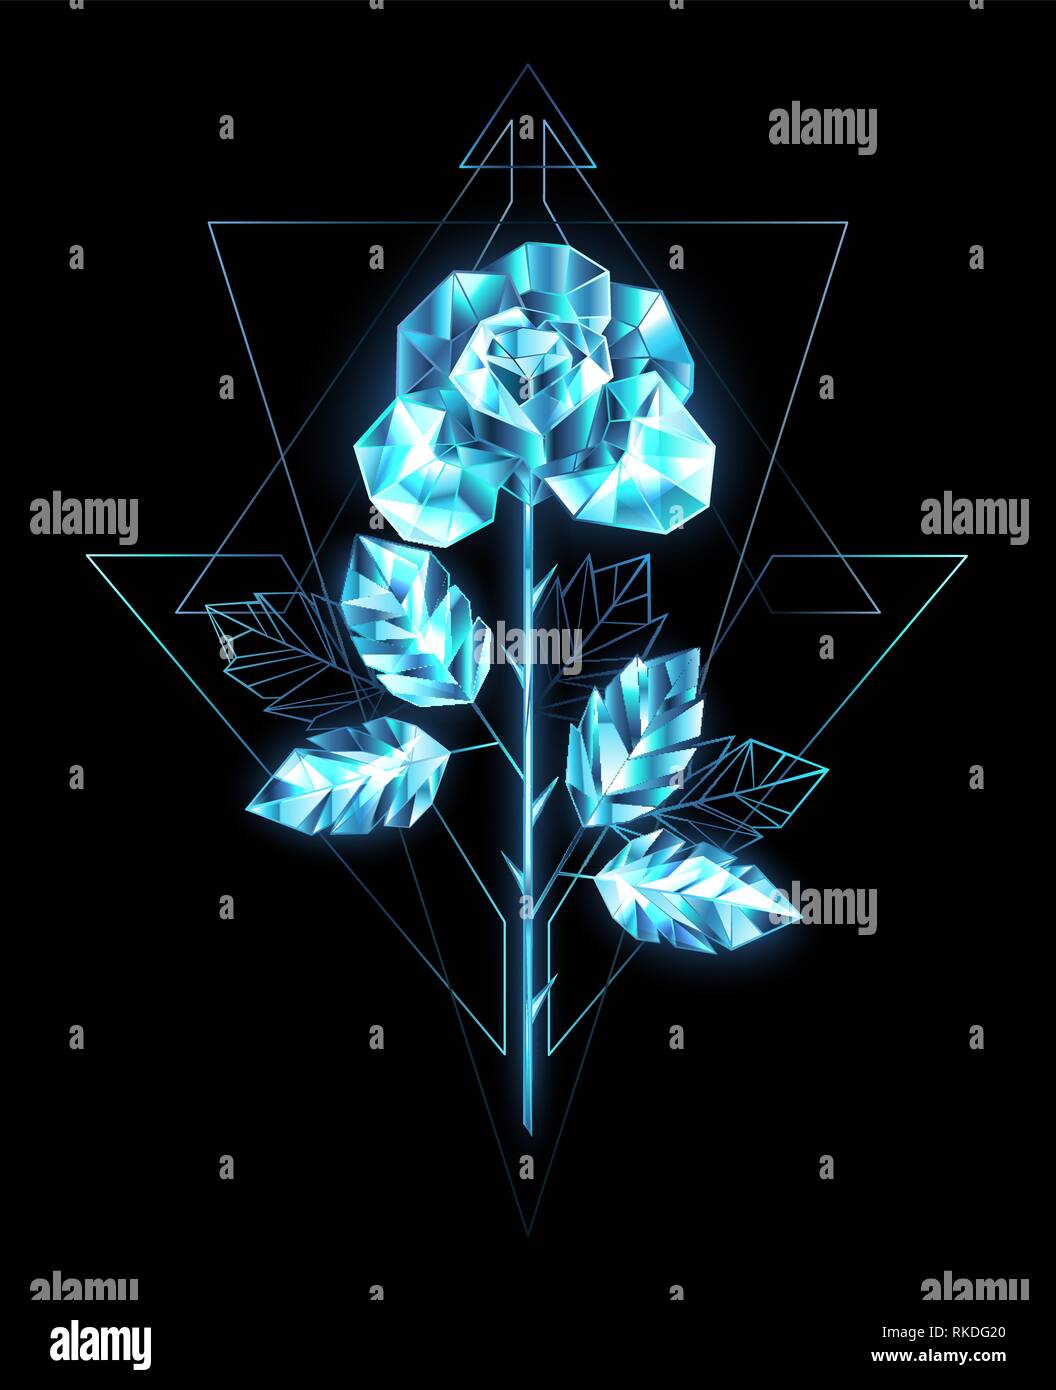 Polygonal, sparkling, crystalline rose with straight stem of blue, transparent ice on black background. Stock Vector